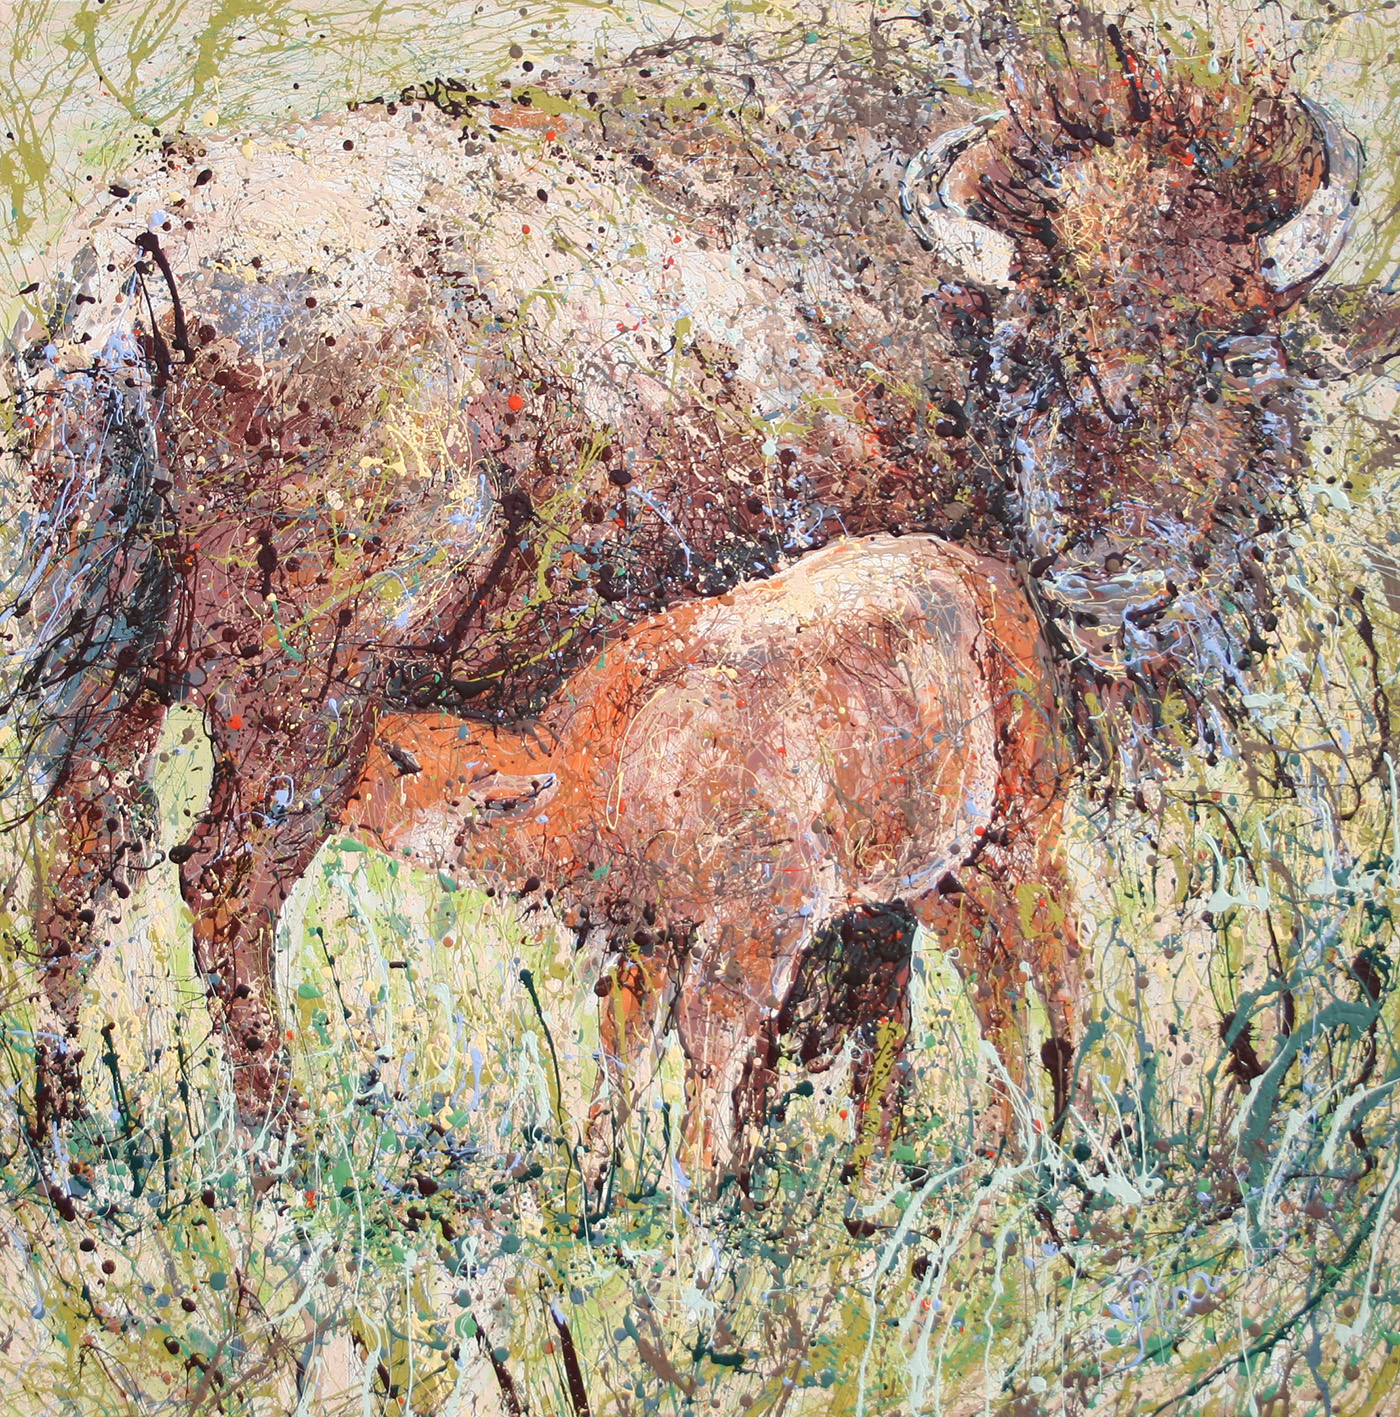 Wyoming spring buffalo Latex Enamel Painting on Gallery Wrapped Canvas by Fort Collins, Colorado Artist  Lisa Cameron Russell